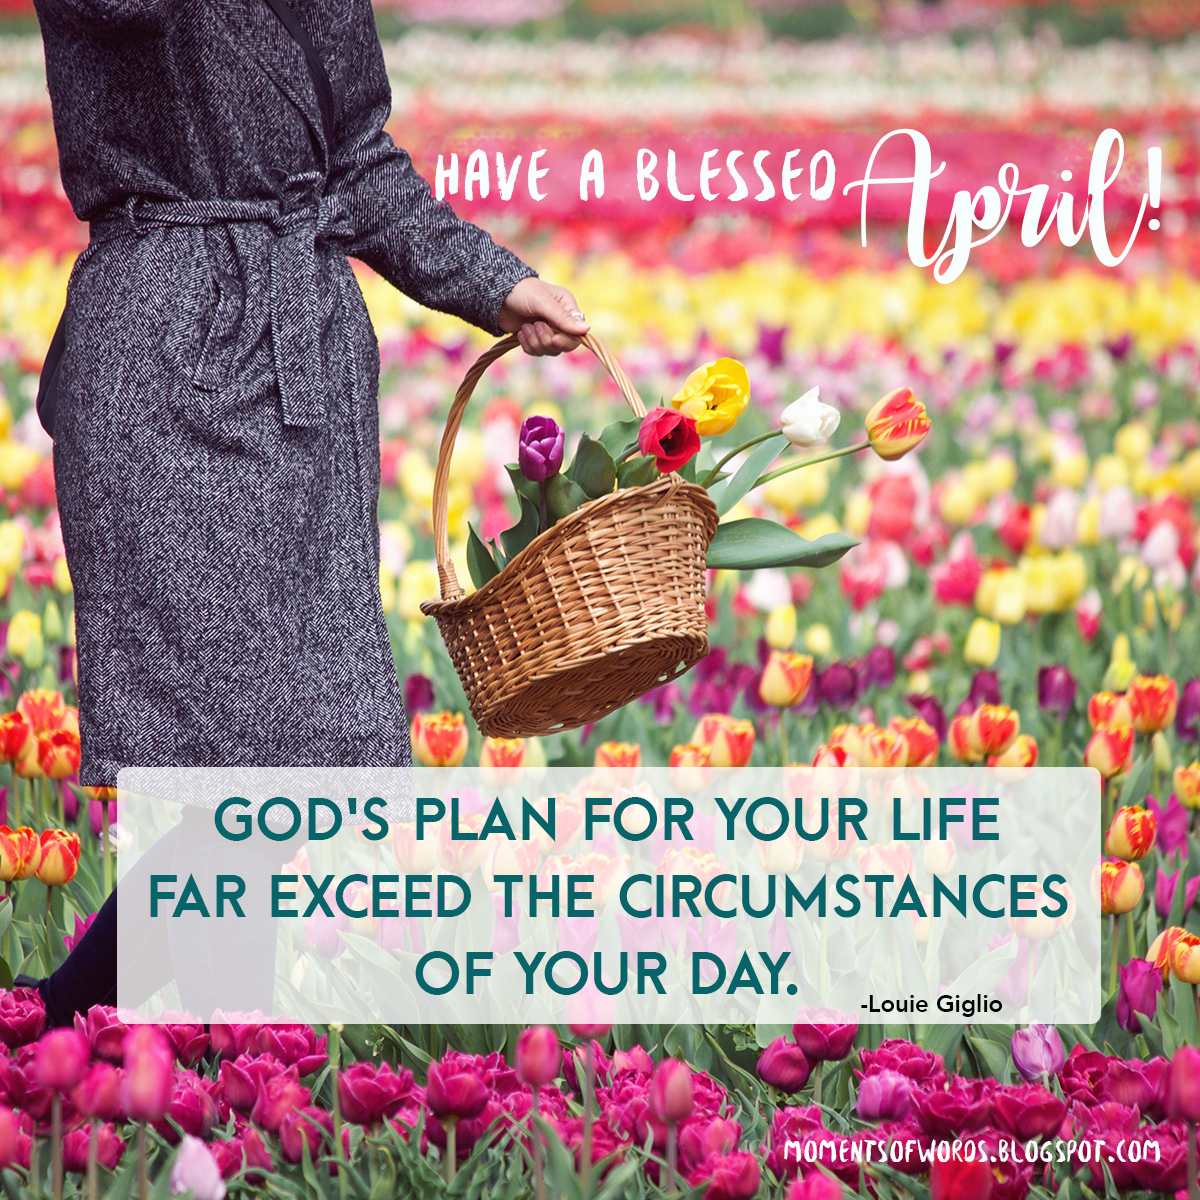 Have a blessed April! Moments of words